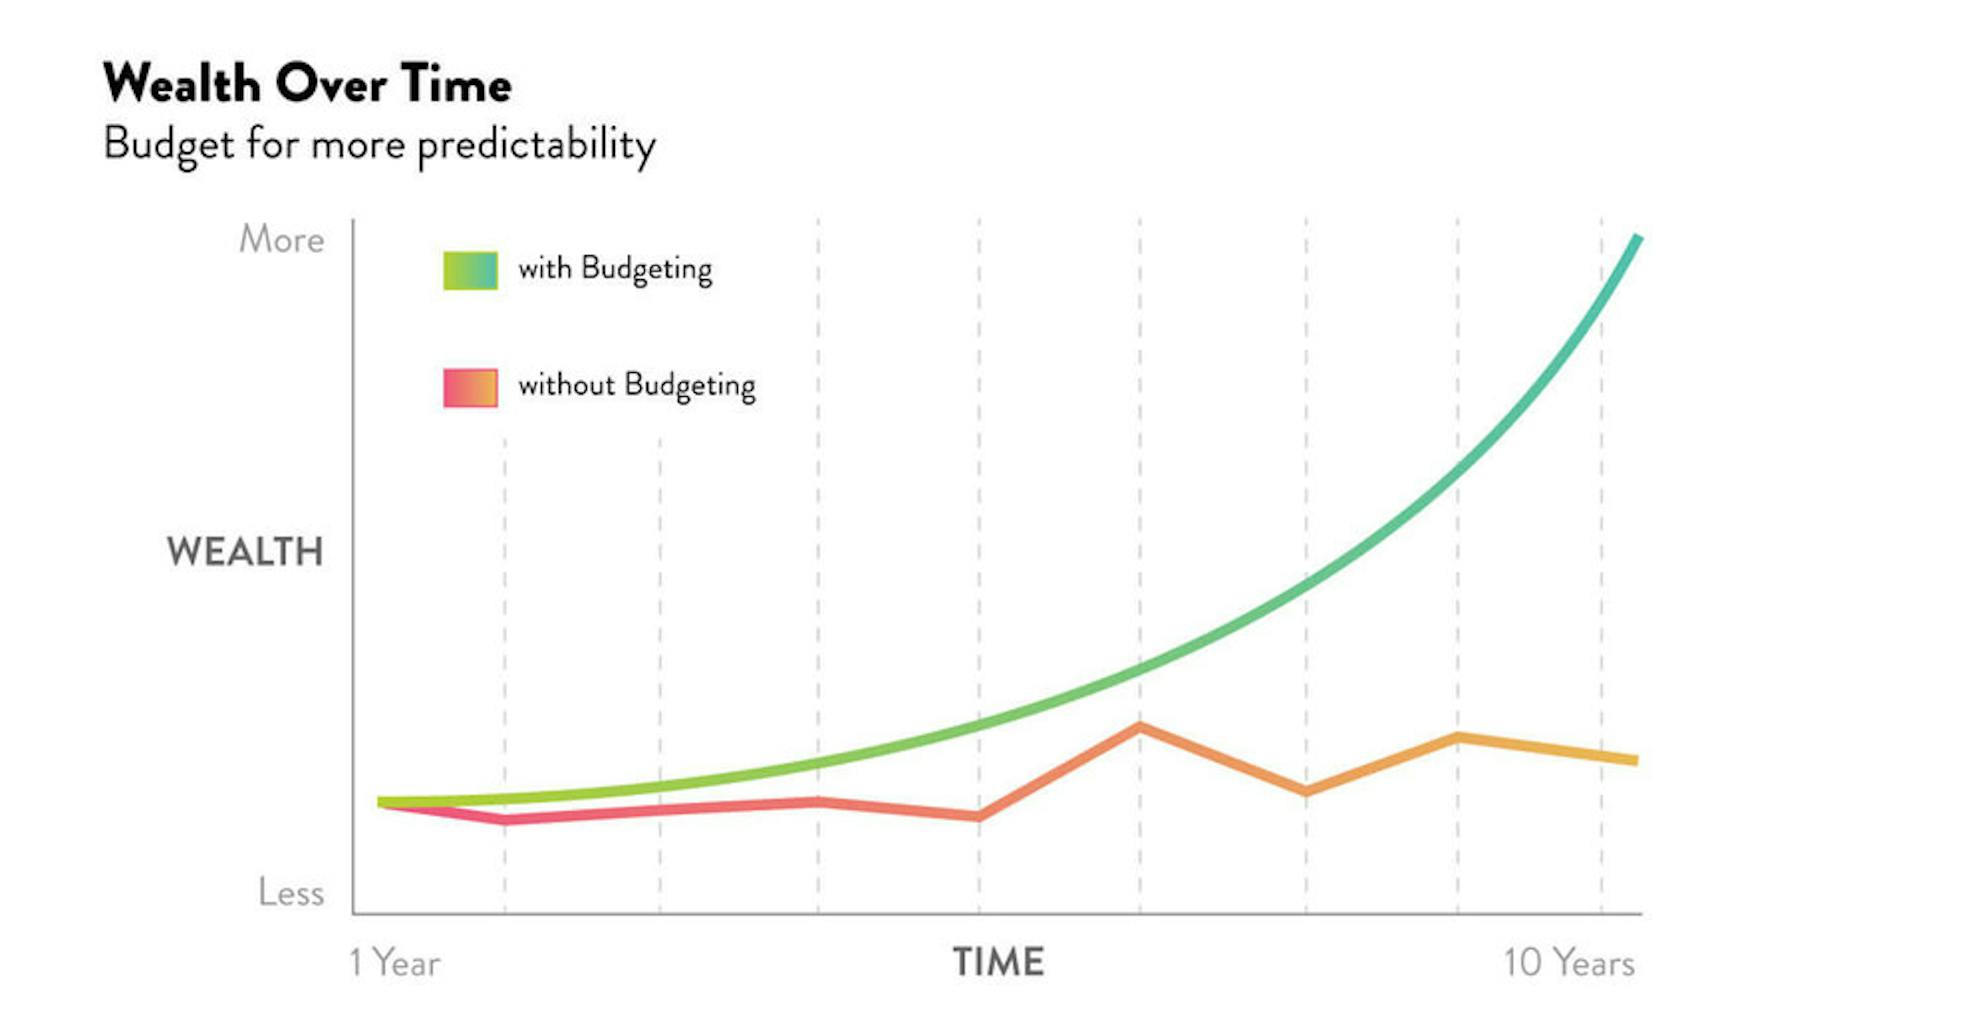 Budgeting helps to form a predictable high-growth future. Graph comparing wealth over time.